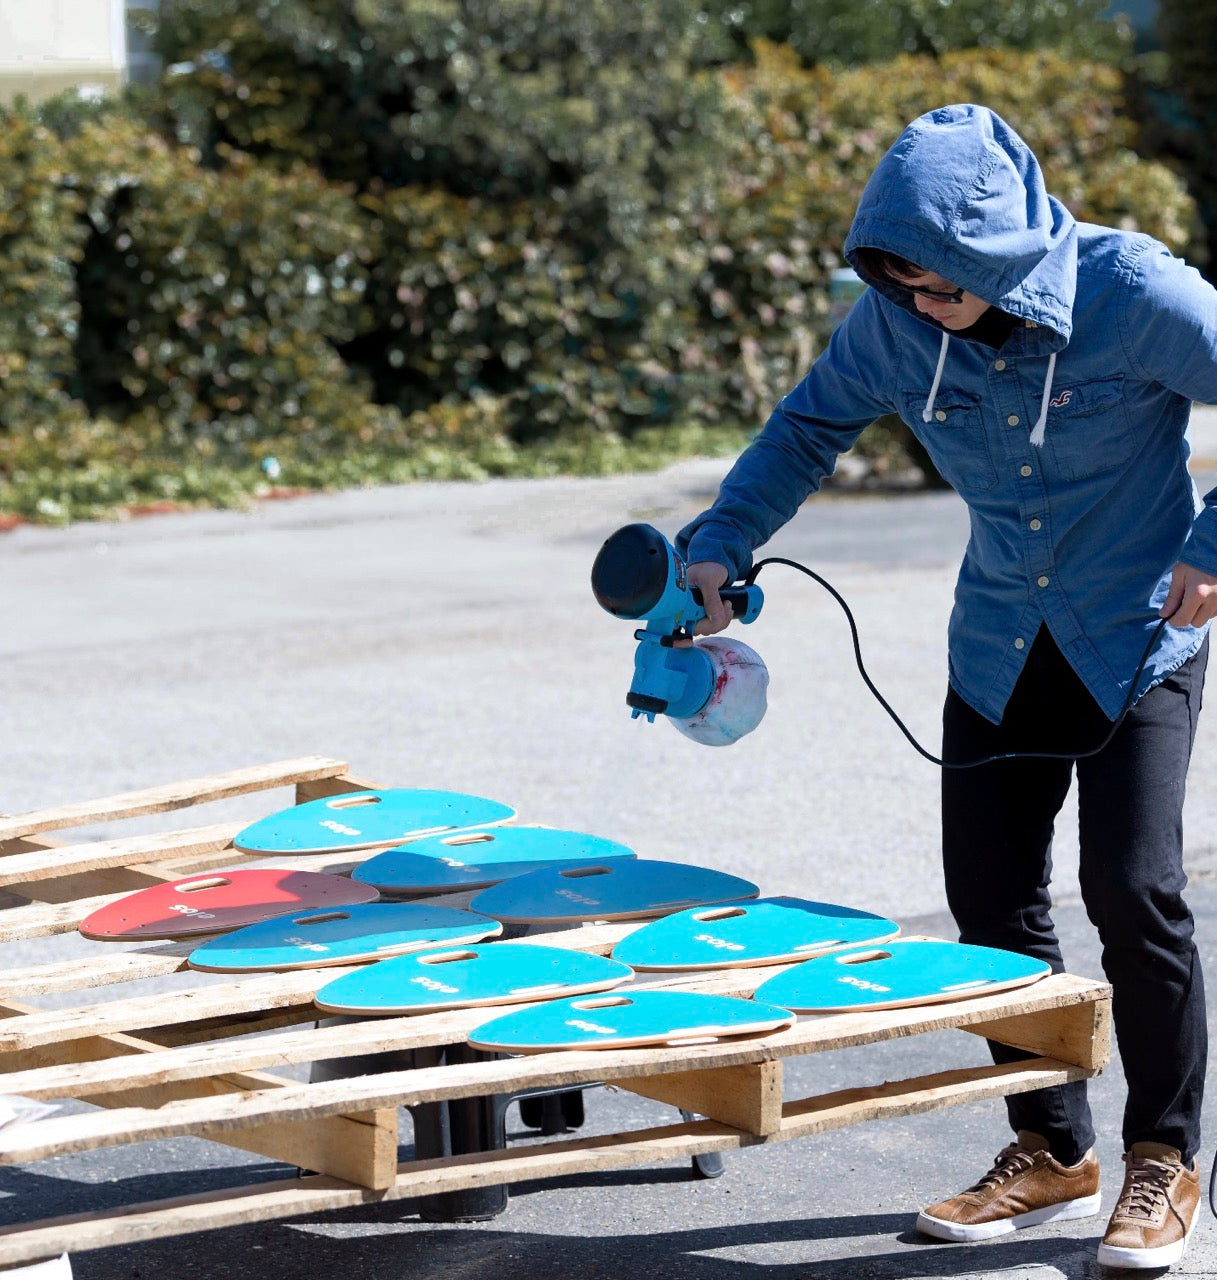 Elos founder Tom showing the process of making Elos skateboards